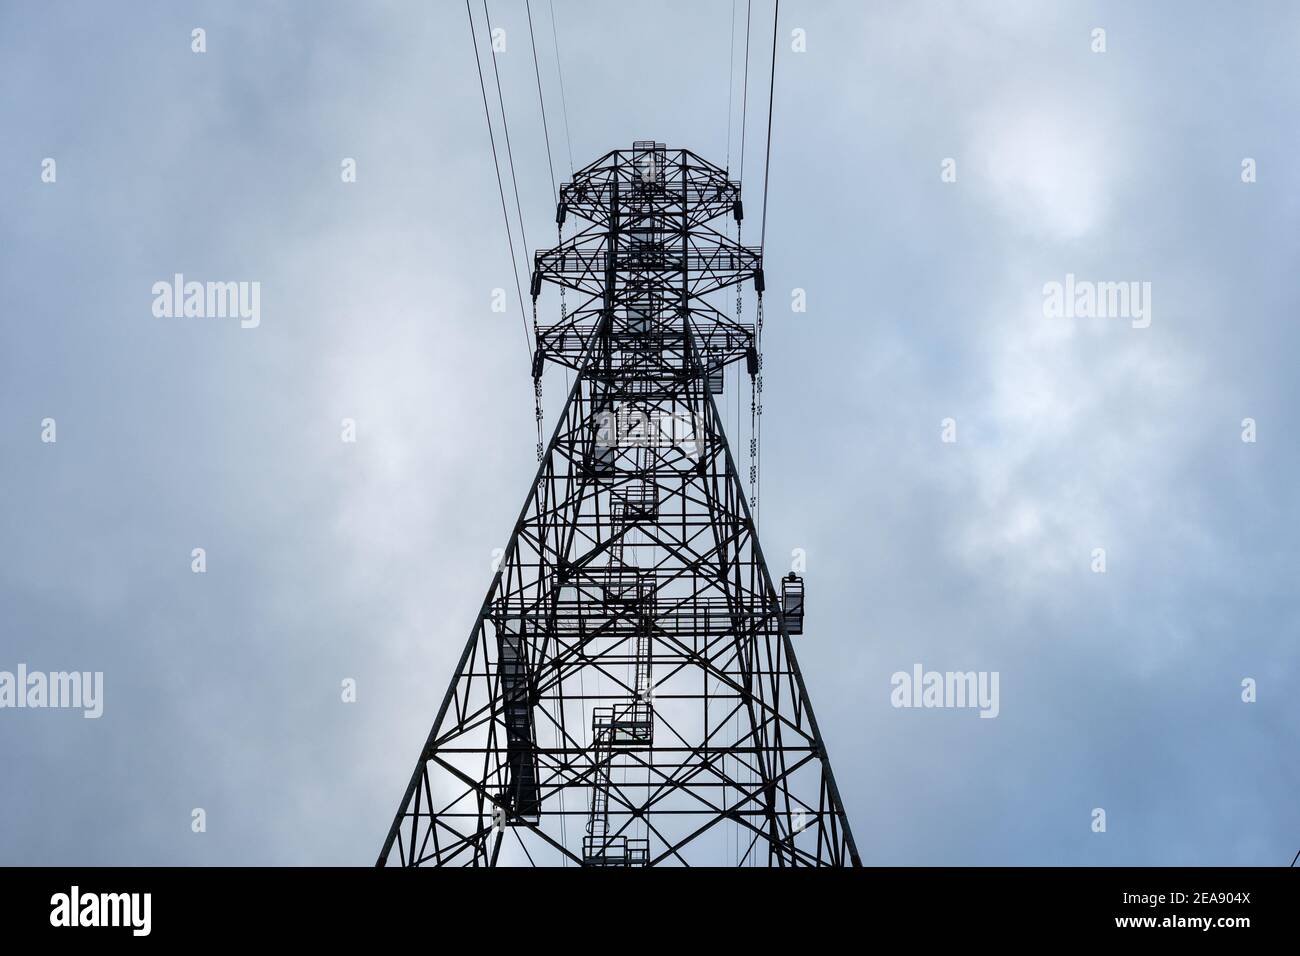 Overhead power line for transmitting electricity Stock Photo